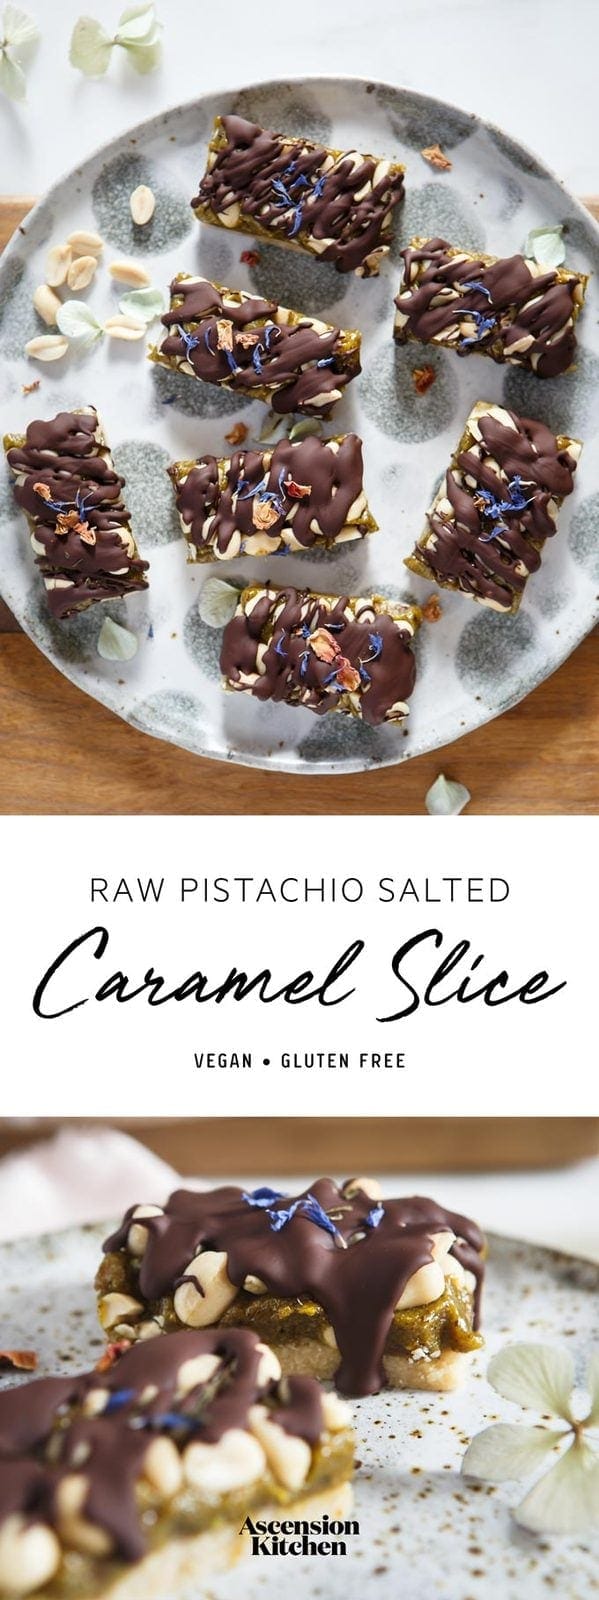 An indulgent raw pistachio Salted Caramel Slice – with peanuts and a drizzle of dark chocolate. #rawveganslice #saltedcaramelslice #pistachiorecipe #saltedcaramelsliceraw #saltedcaramelslicevegan #saltedcaramelslicepaleo #saltedcaramelslicerecipe #homemadesaltedcaramel #AscensionKitchen  // Pin to your own inspiration board! //